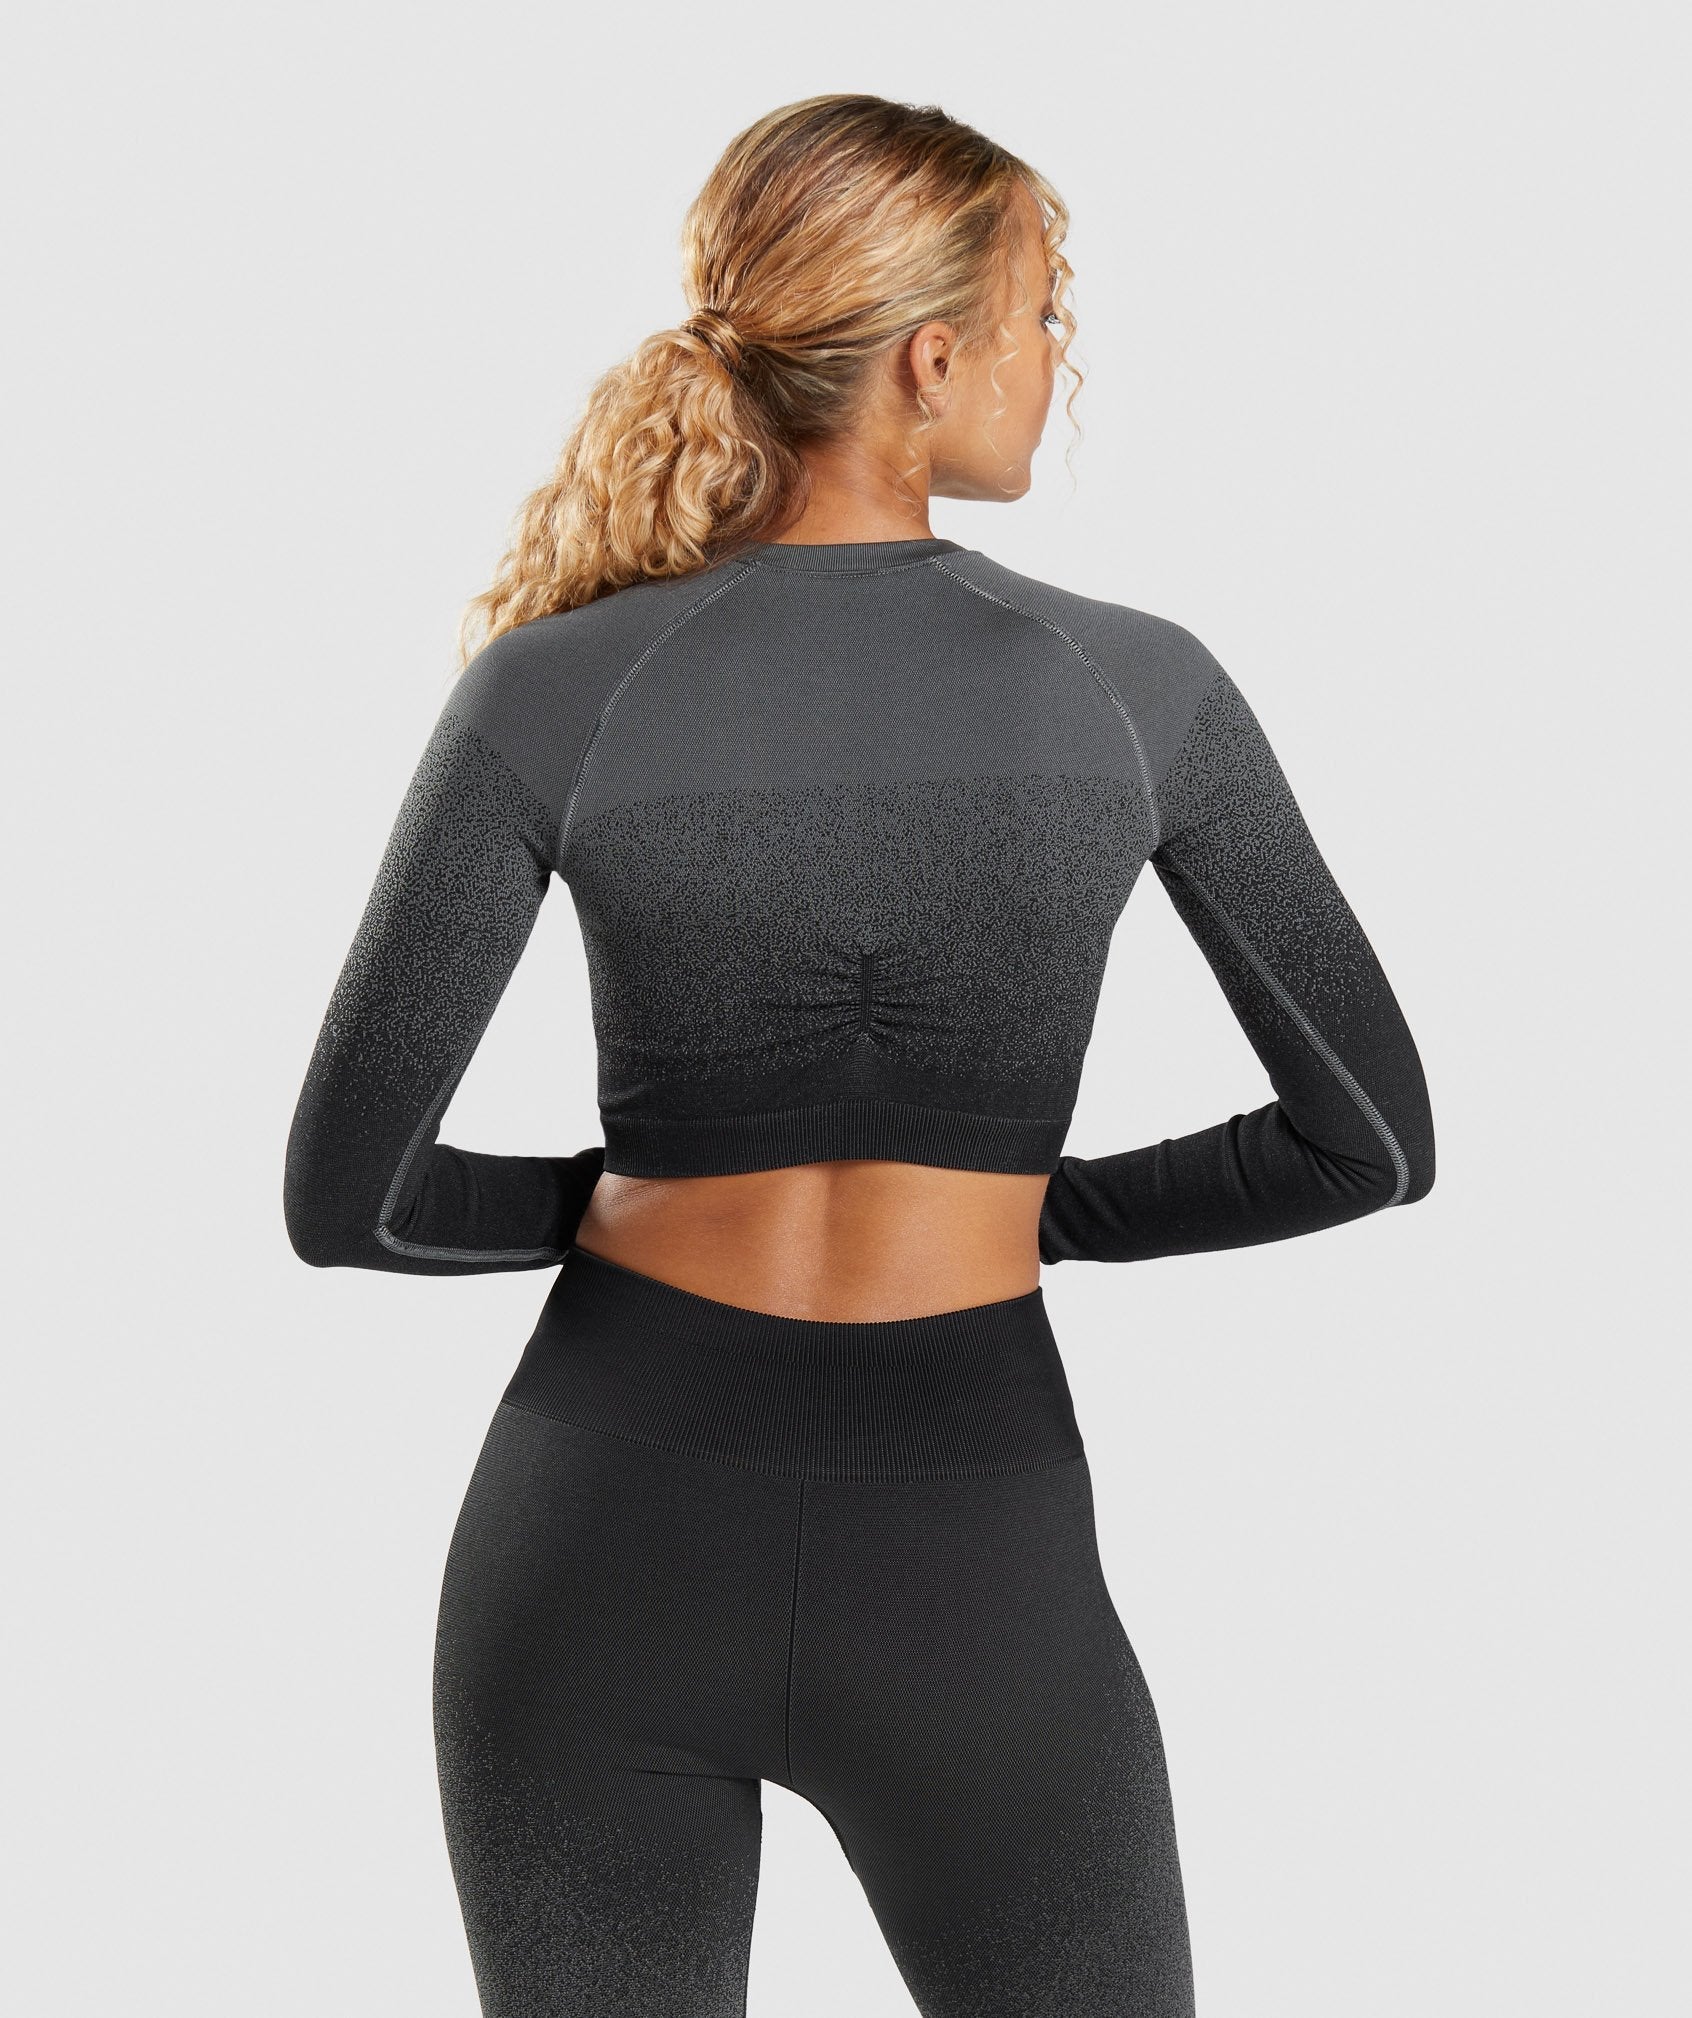 Adapt Ombre Seamless Long Sleeve Crop Top in Black/Grey - view 3